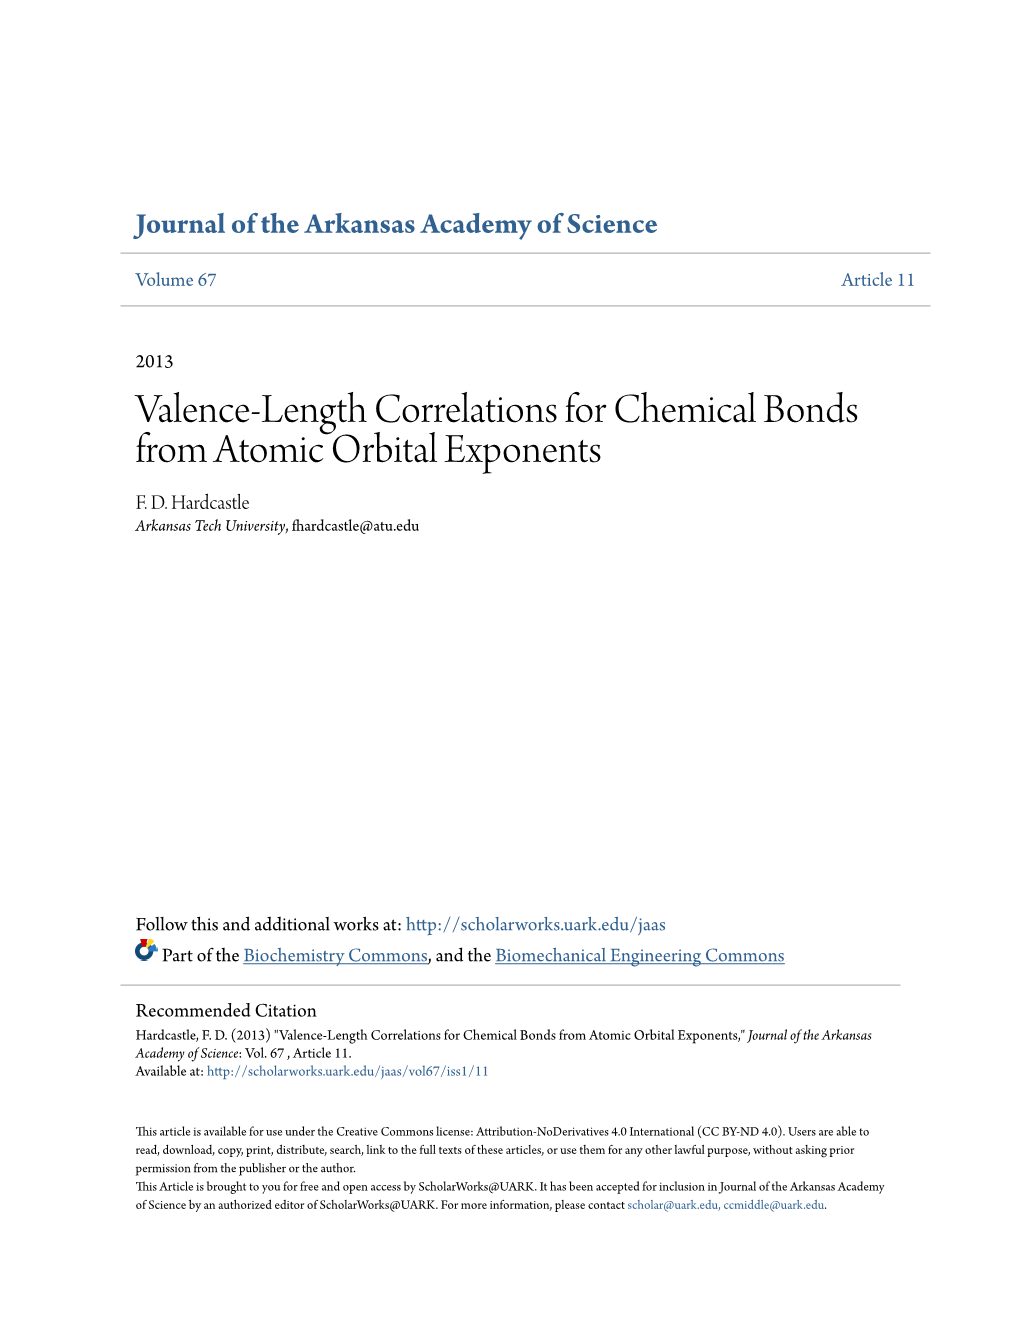 Valence-Length Correlations for Chemical Bonds from Atomic Orbital Exponents F